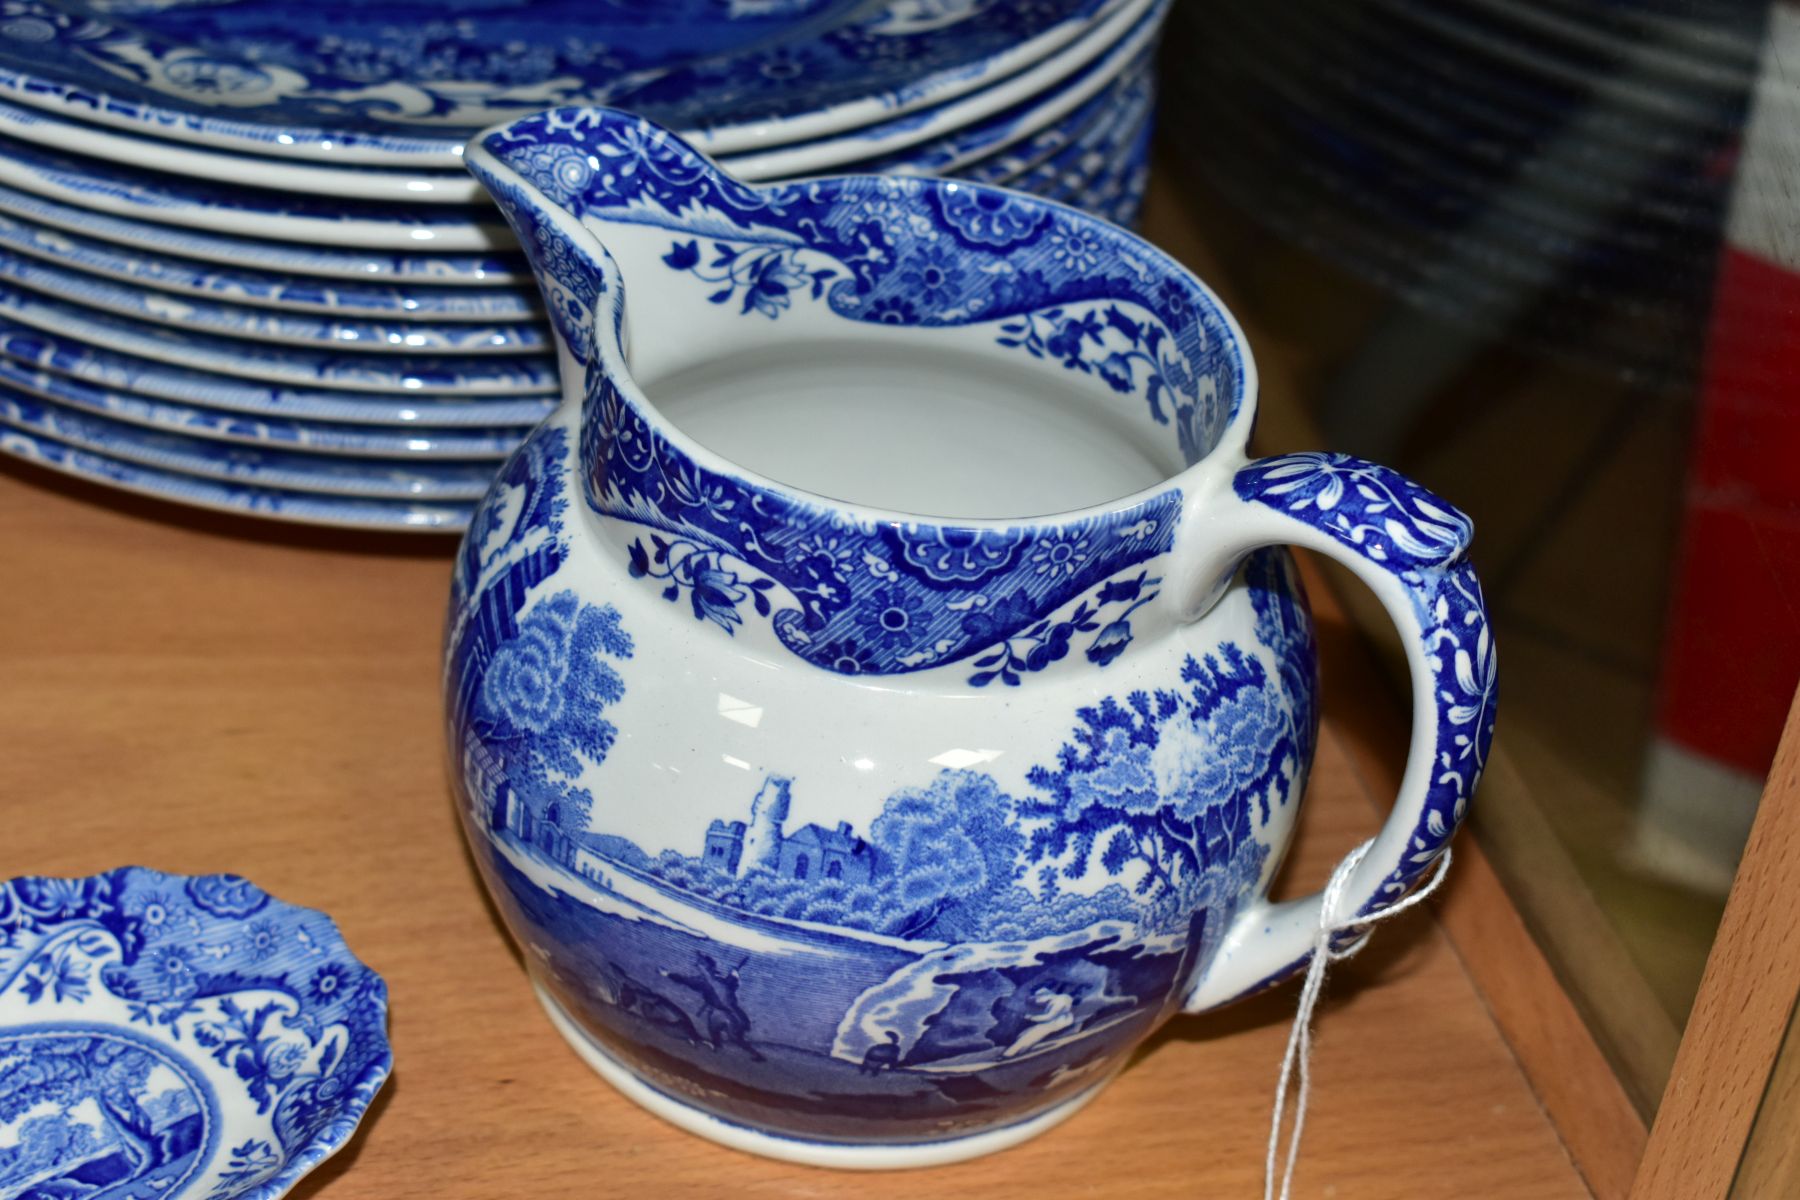 A QUANTITY OF MODERN SPODE ITALIAN SPODE DESIGN DINNER WARES, comprising an 11cm high jug, two small - Image 3 of 10